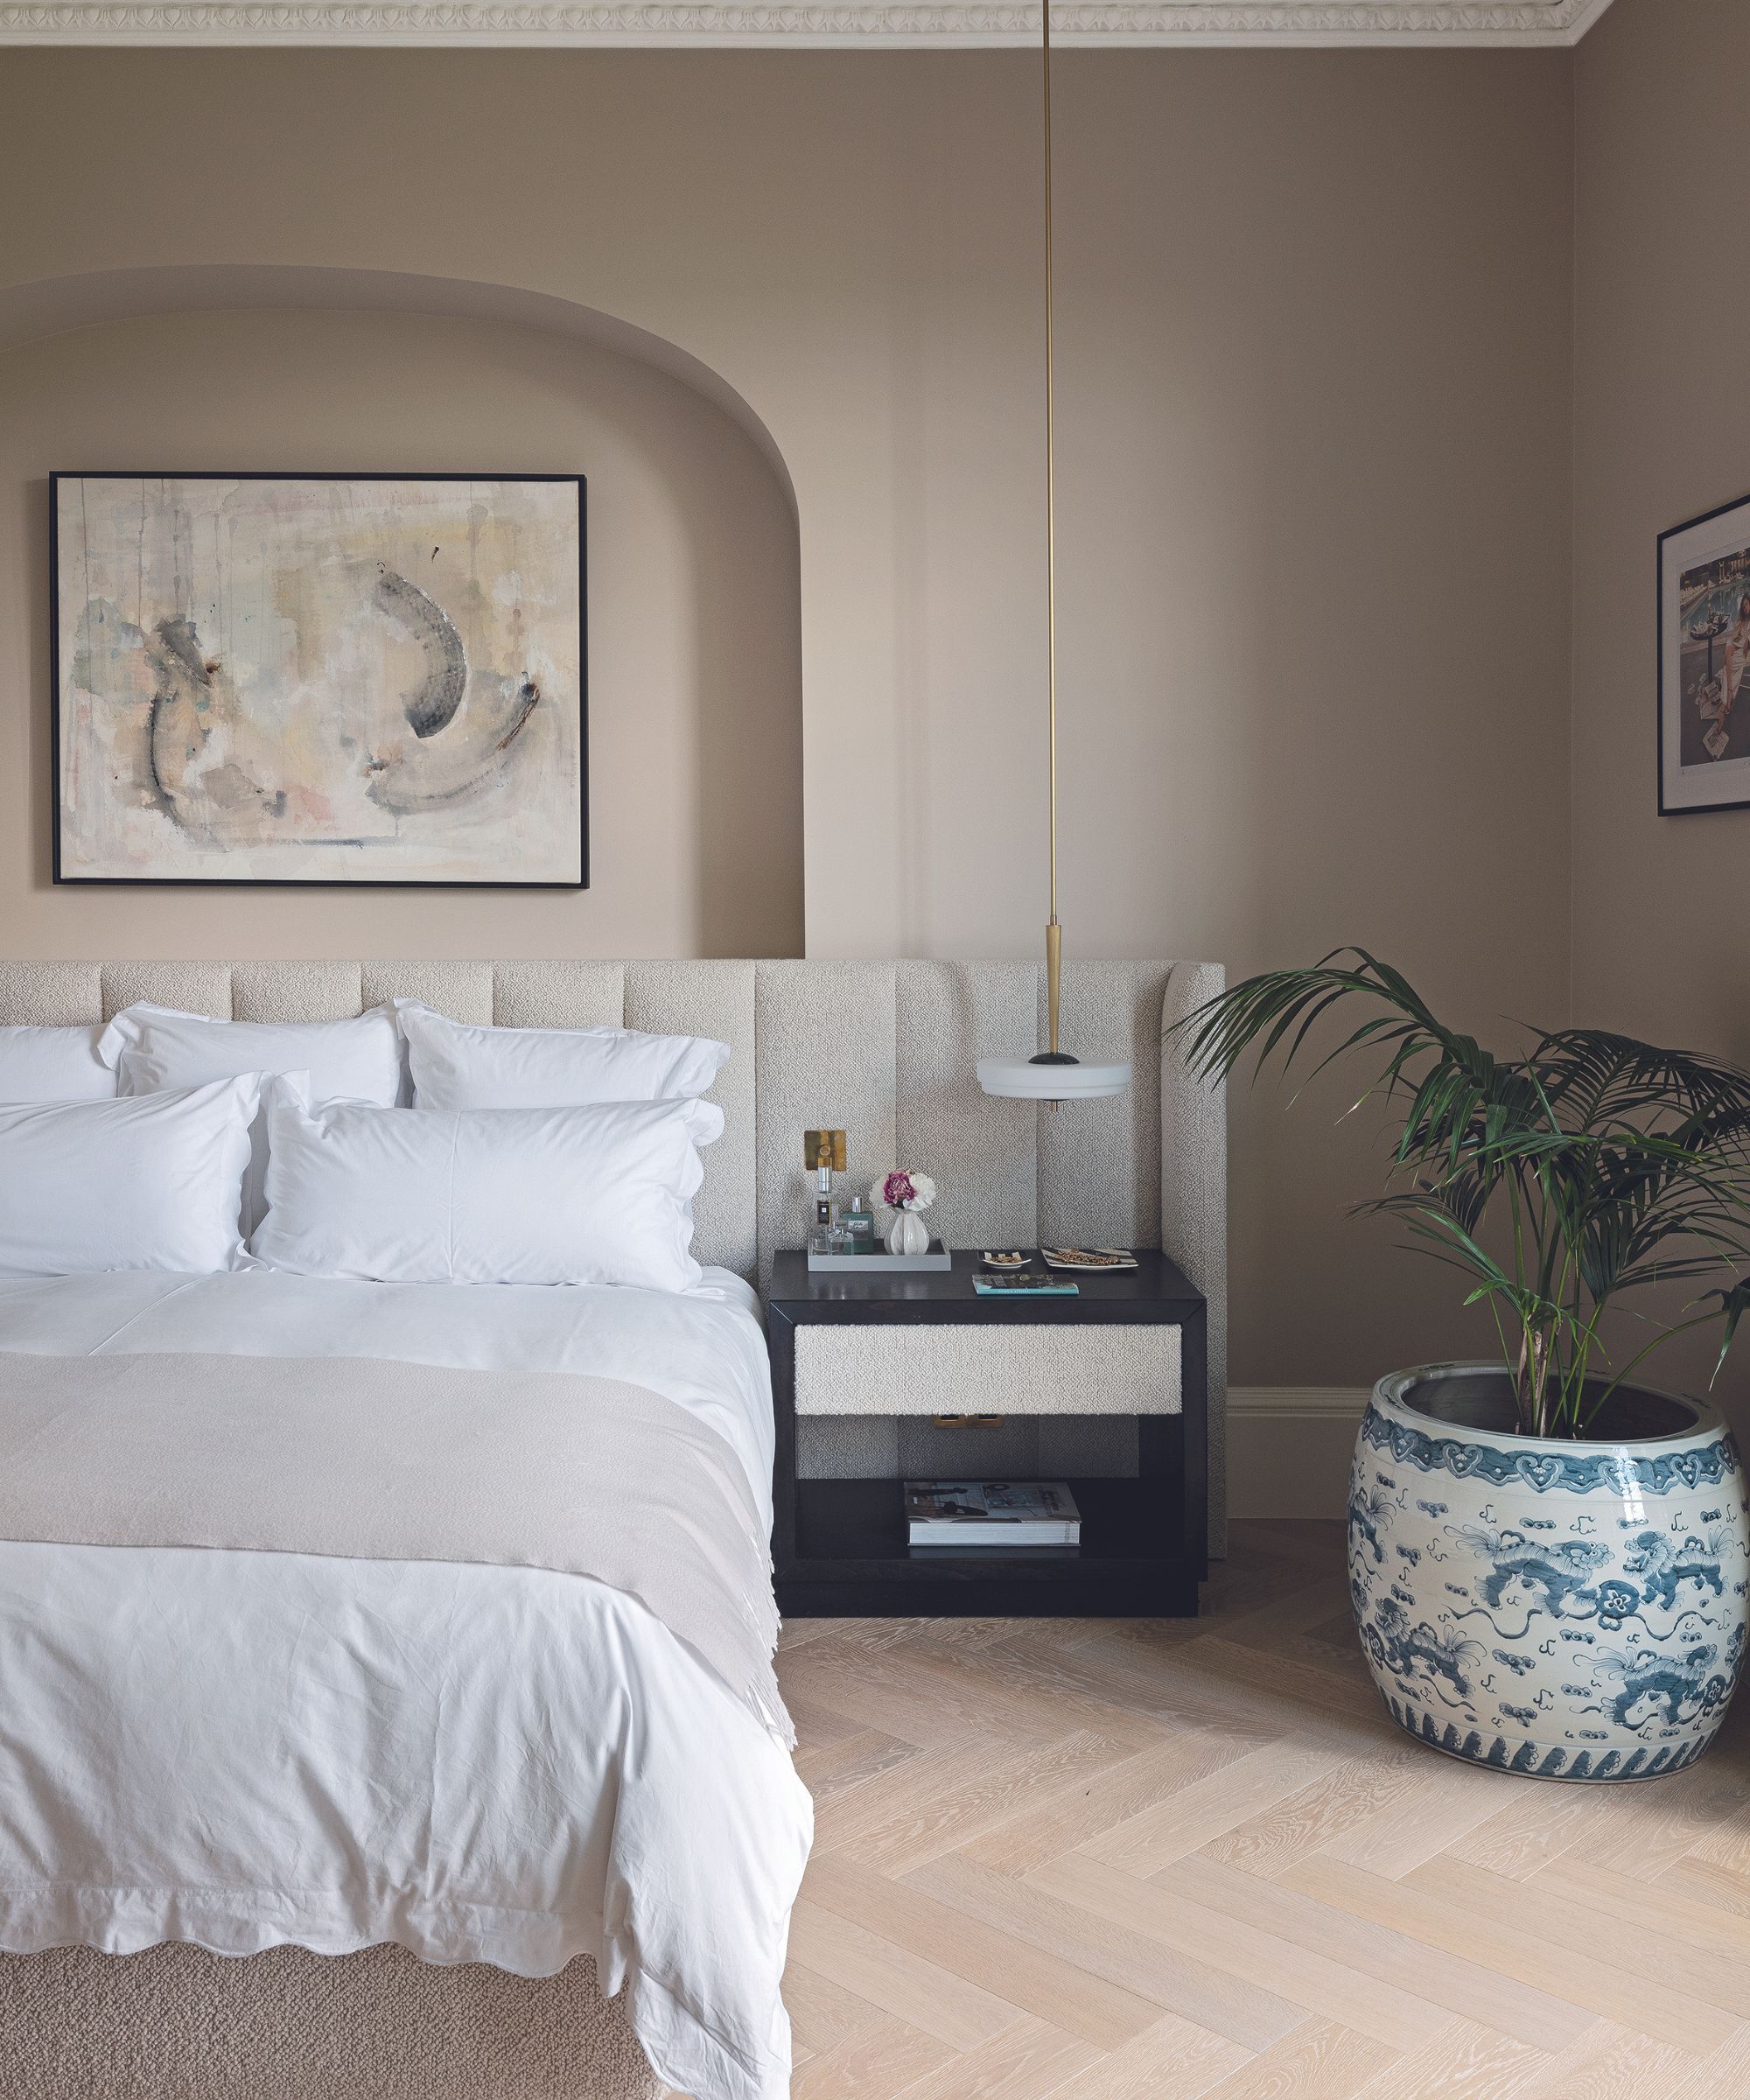 Beige bedroom with palm in blue and white pot